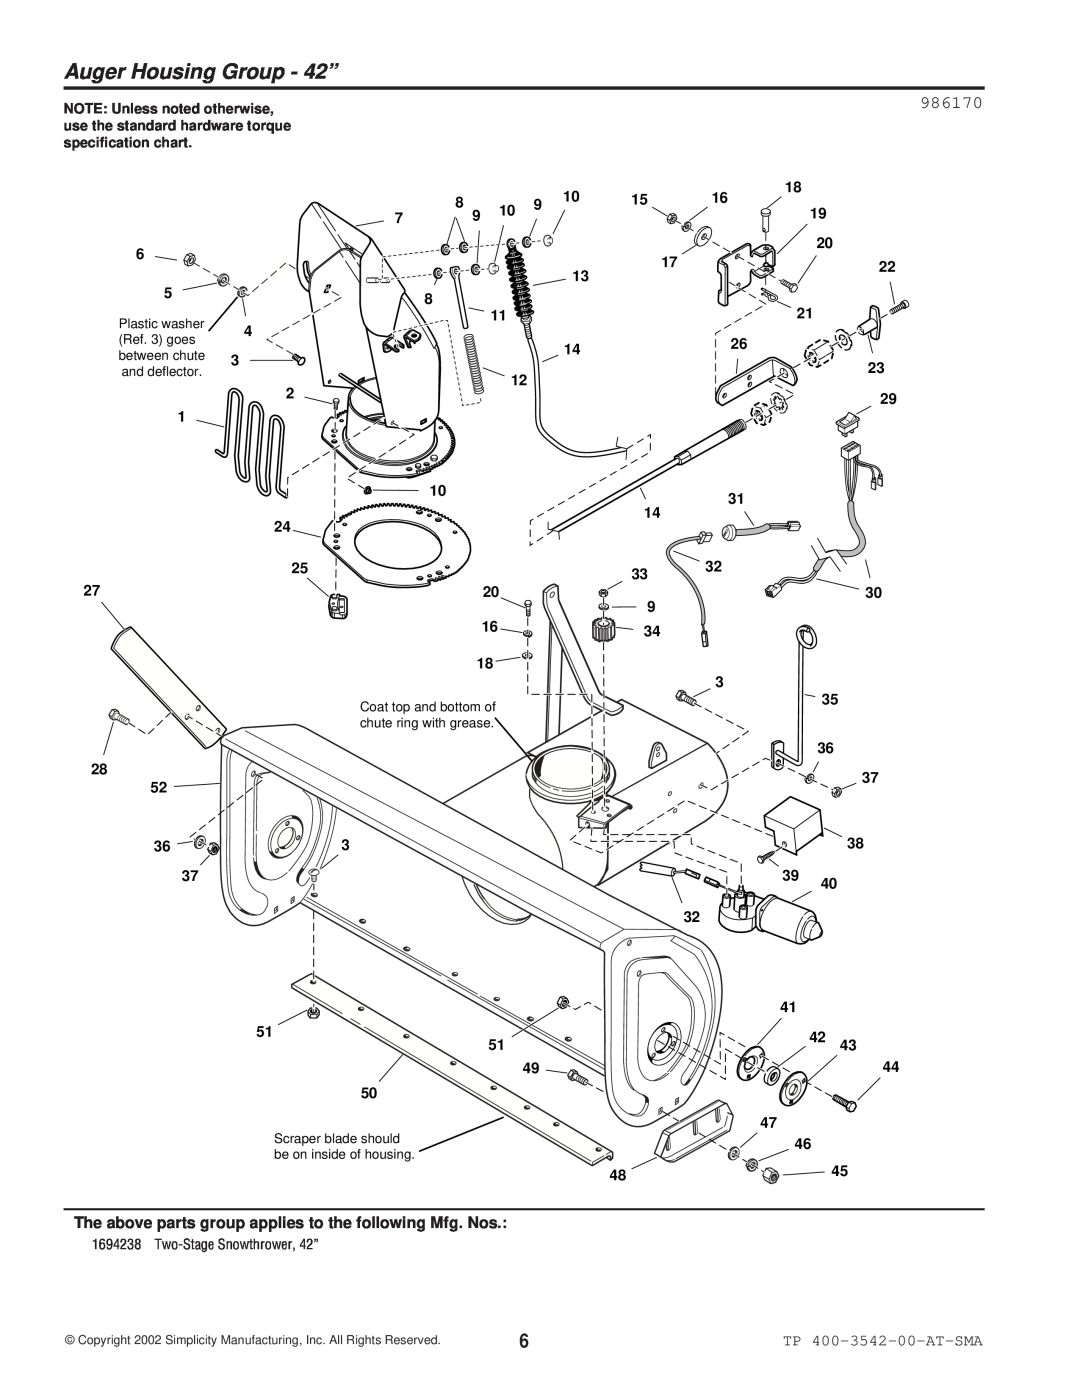 Simplicity 1694238 manual Auger Housing Group - 42”, 986170, The above parts group applies to the following Mfg. Nos, 18xx 